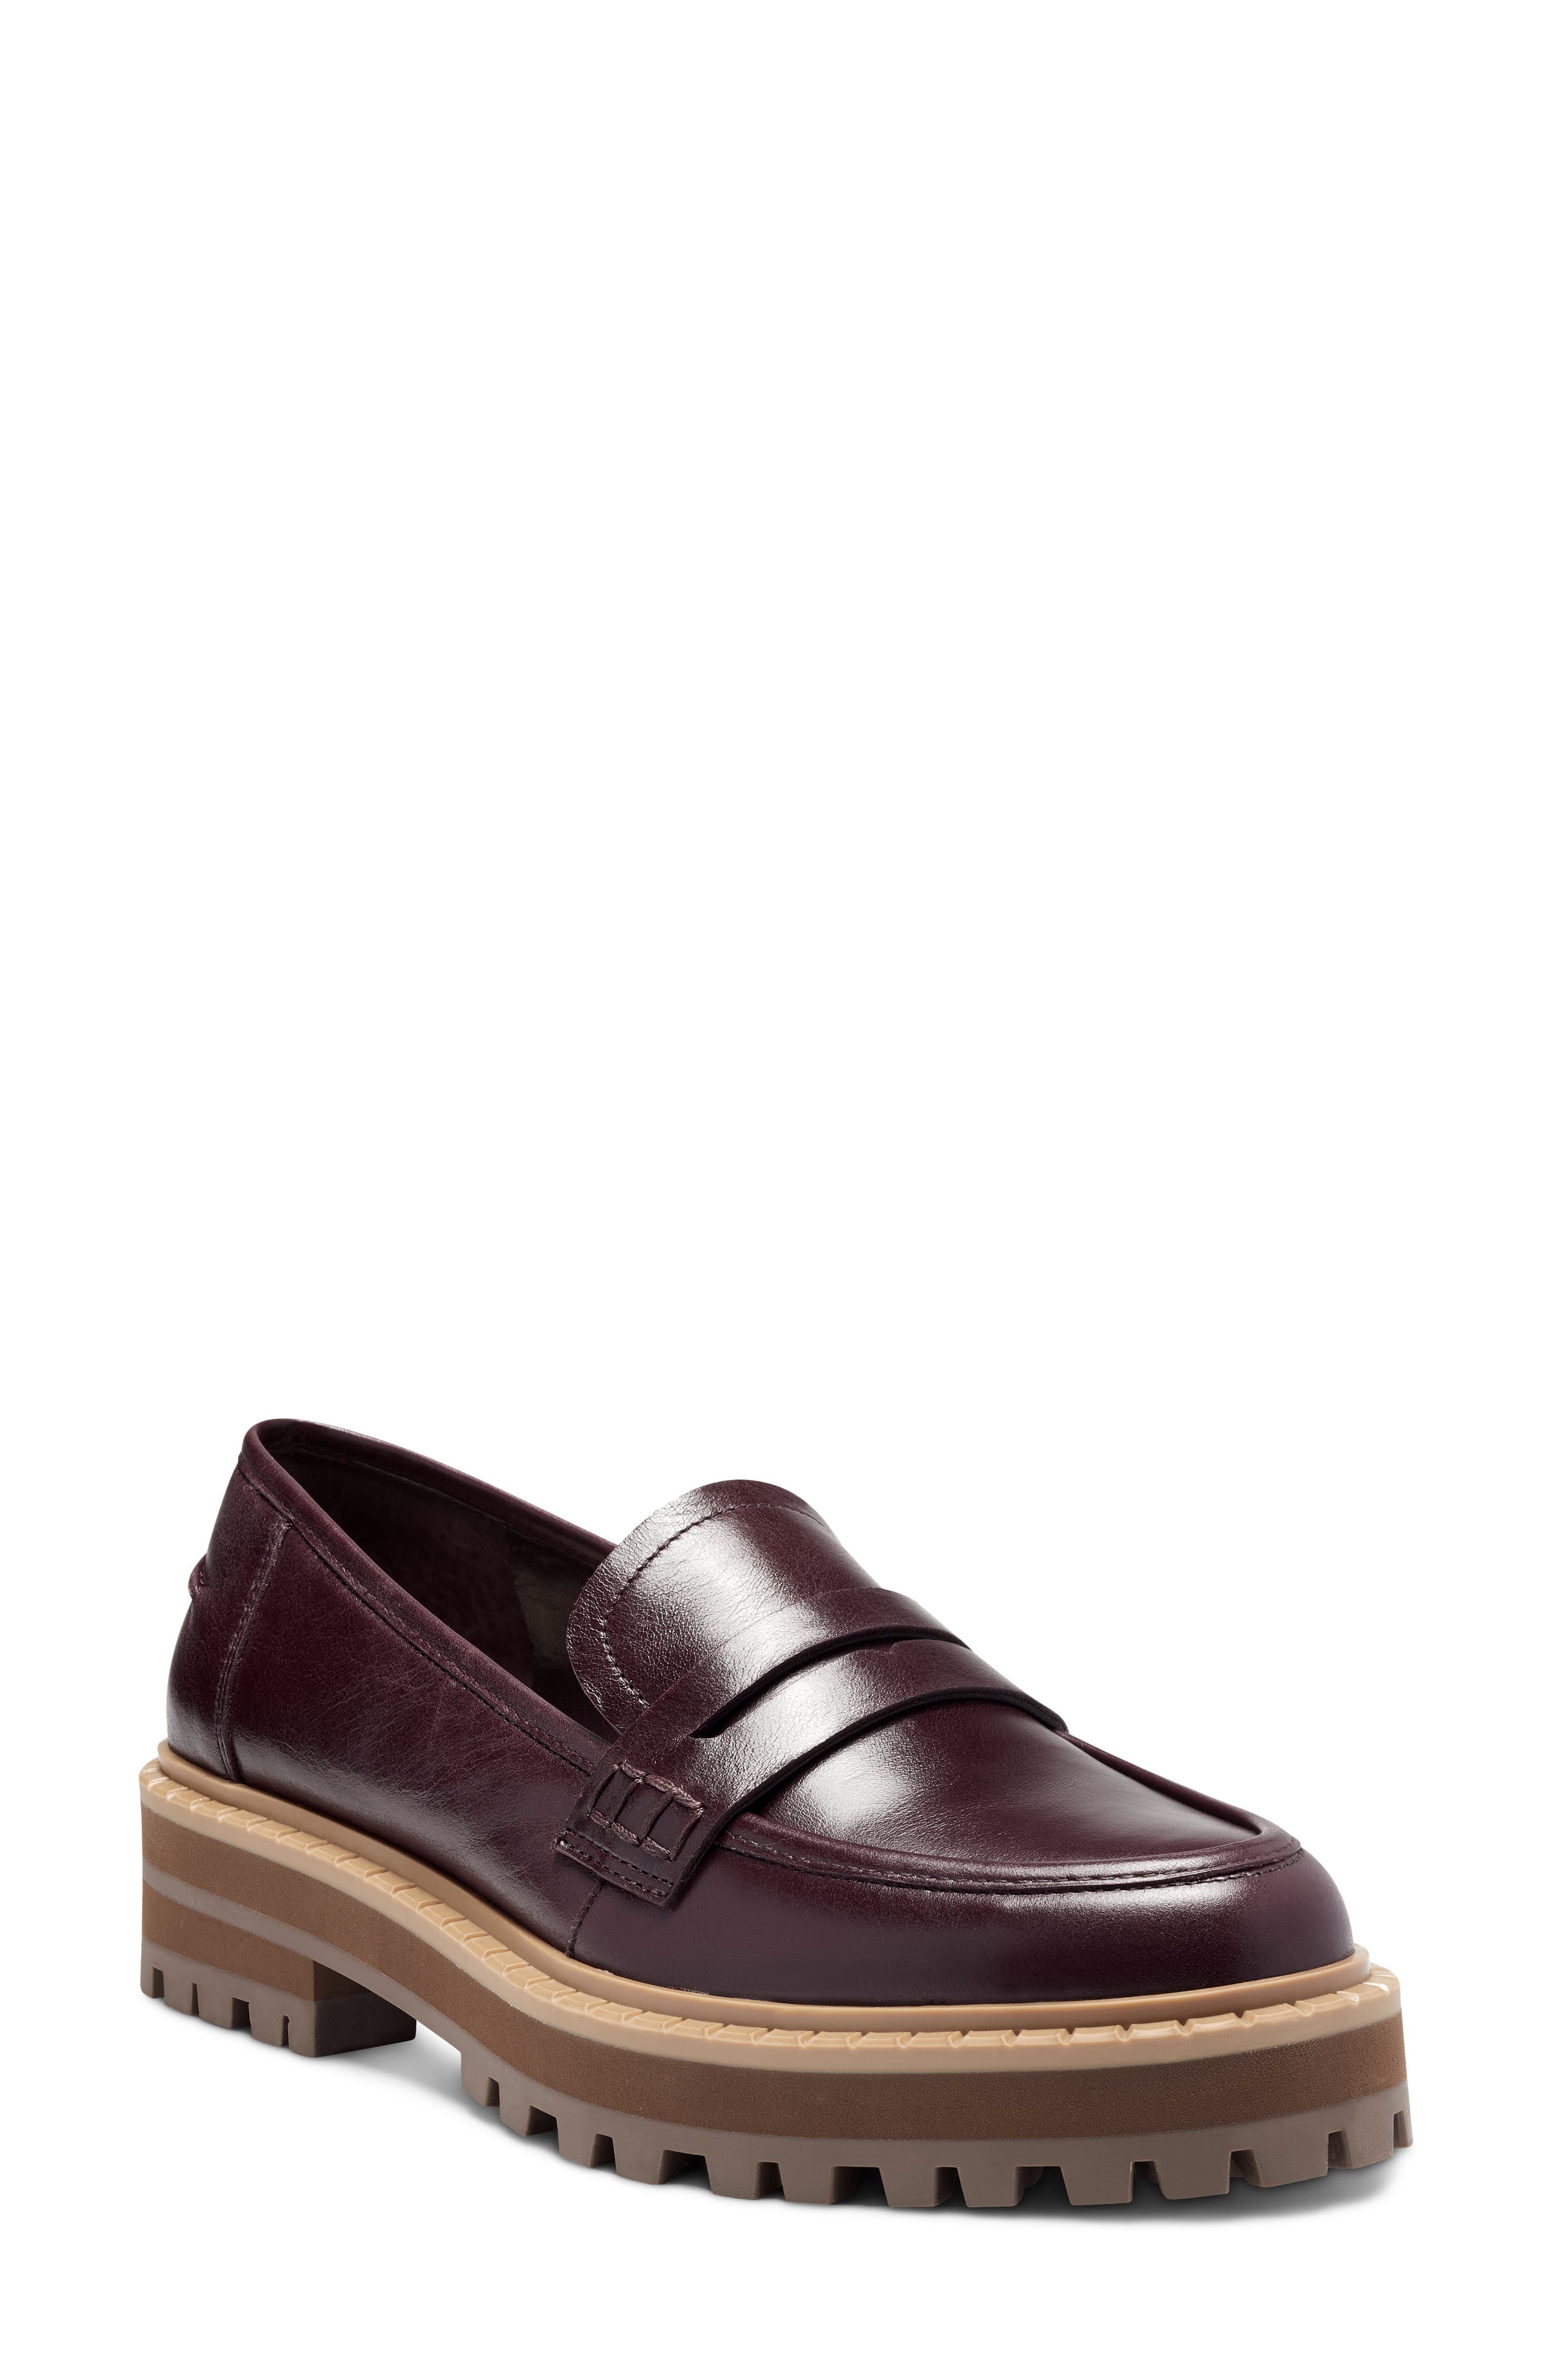 vince camuto women's loafers